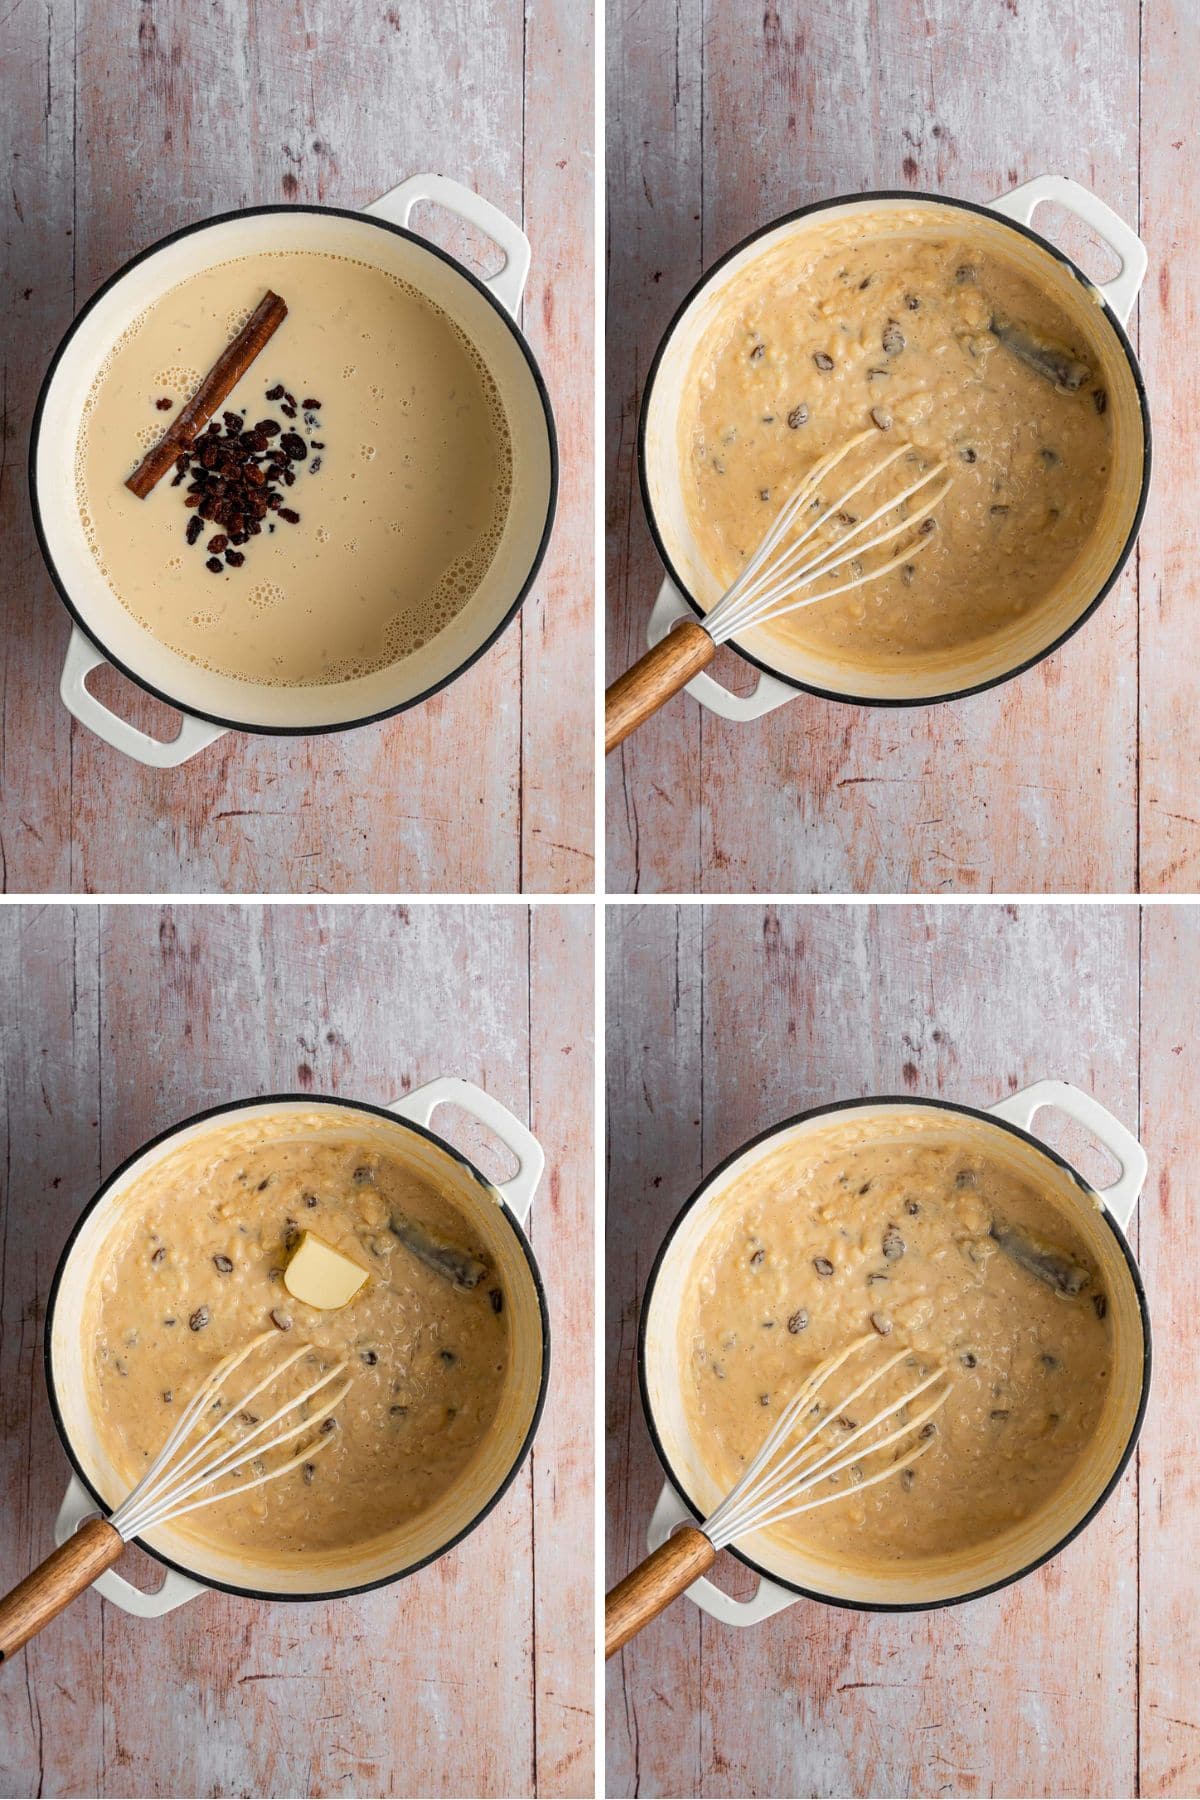 Arroz con Leche preparation collage cooking and flavoring pudding